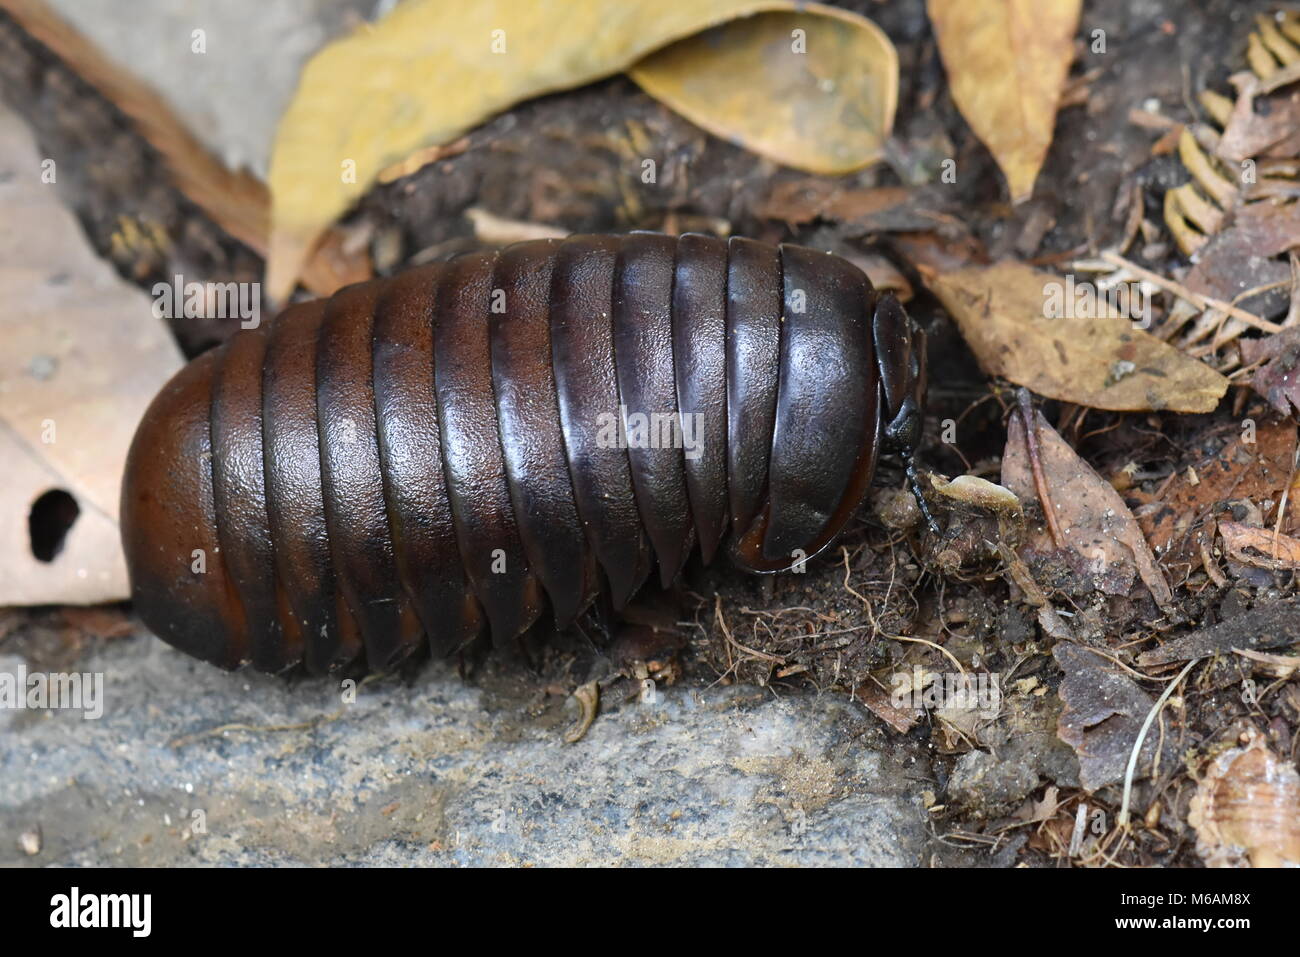 Malagasy giant pill millipede in a rainforest Stock Photo